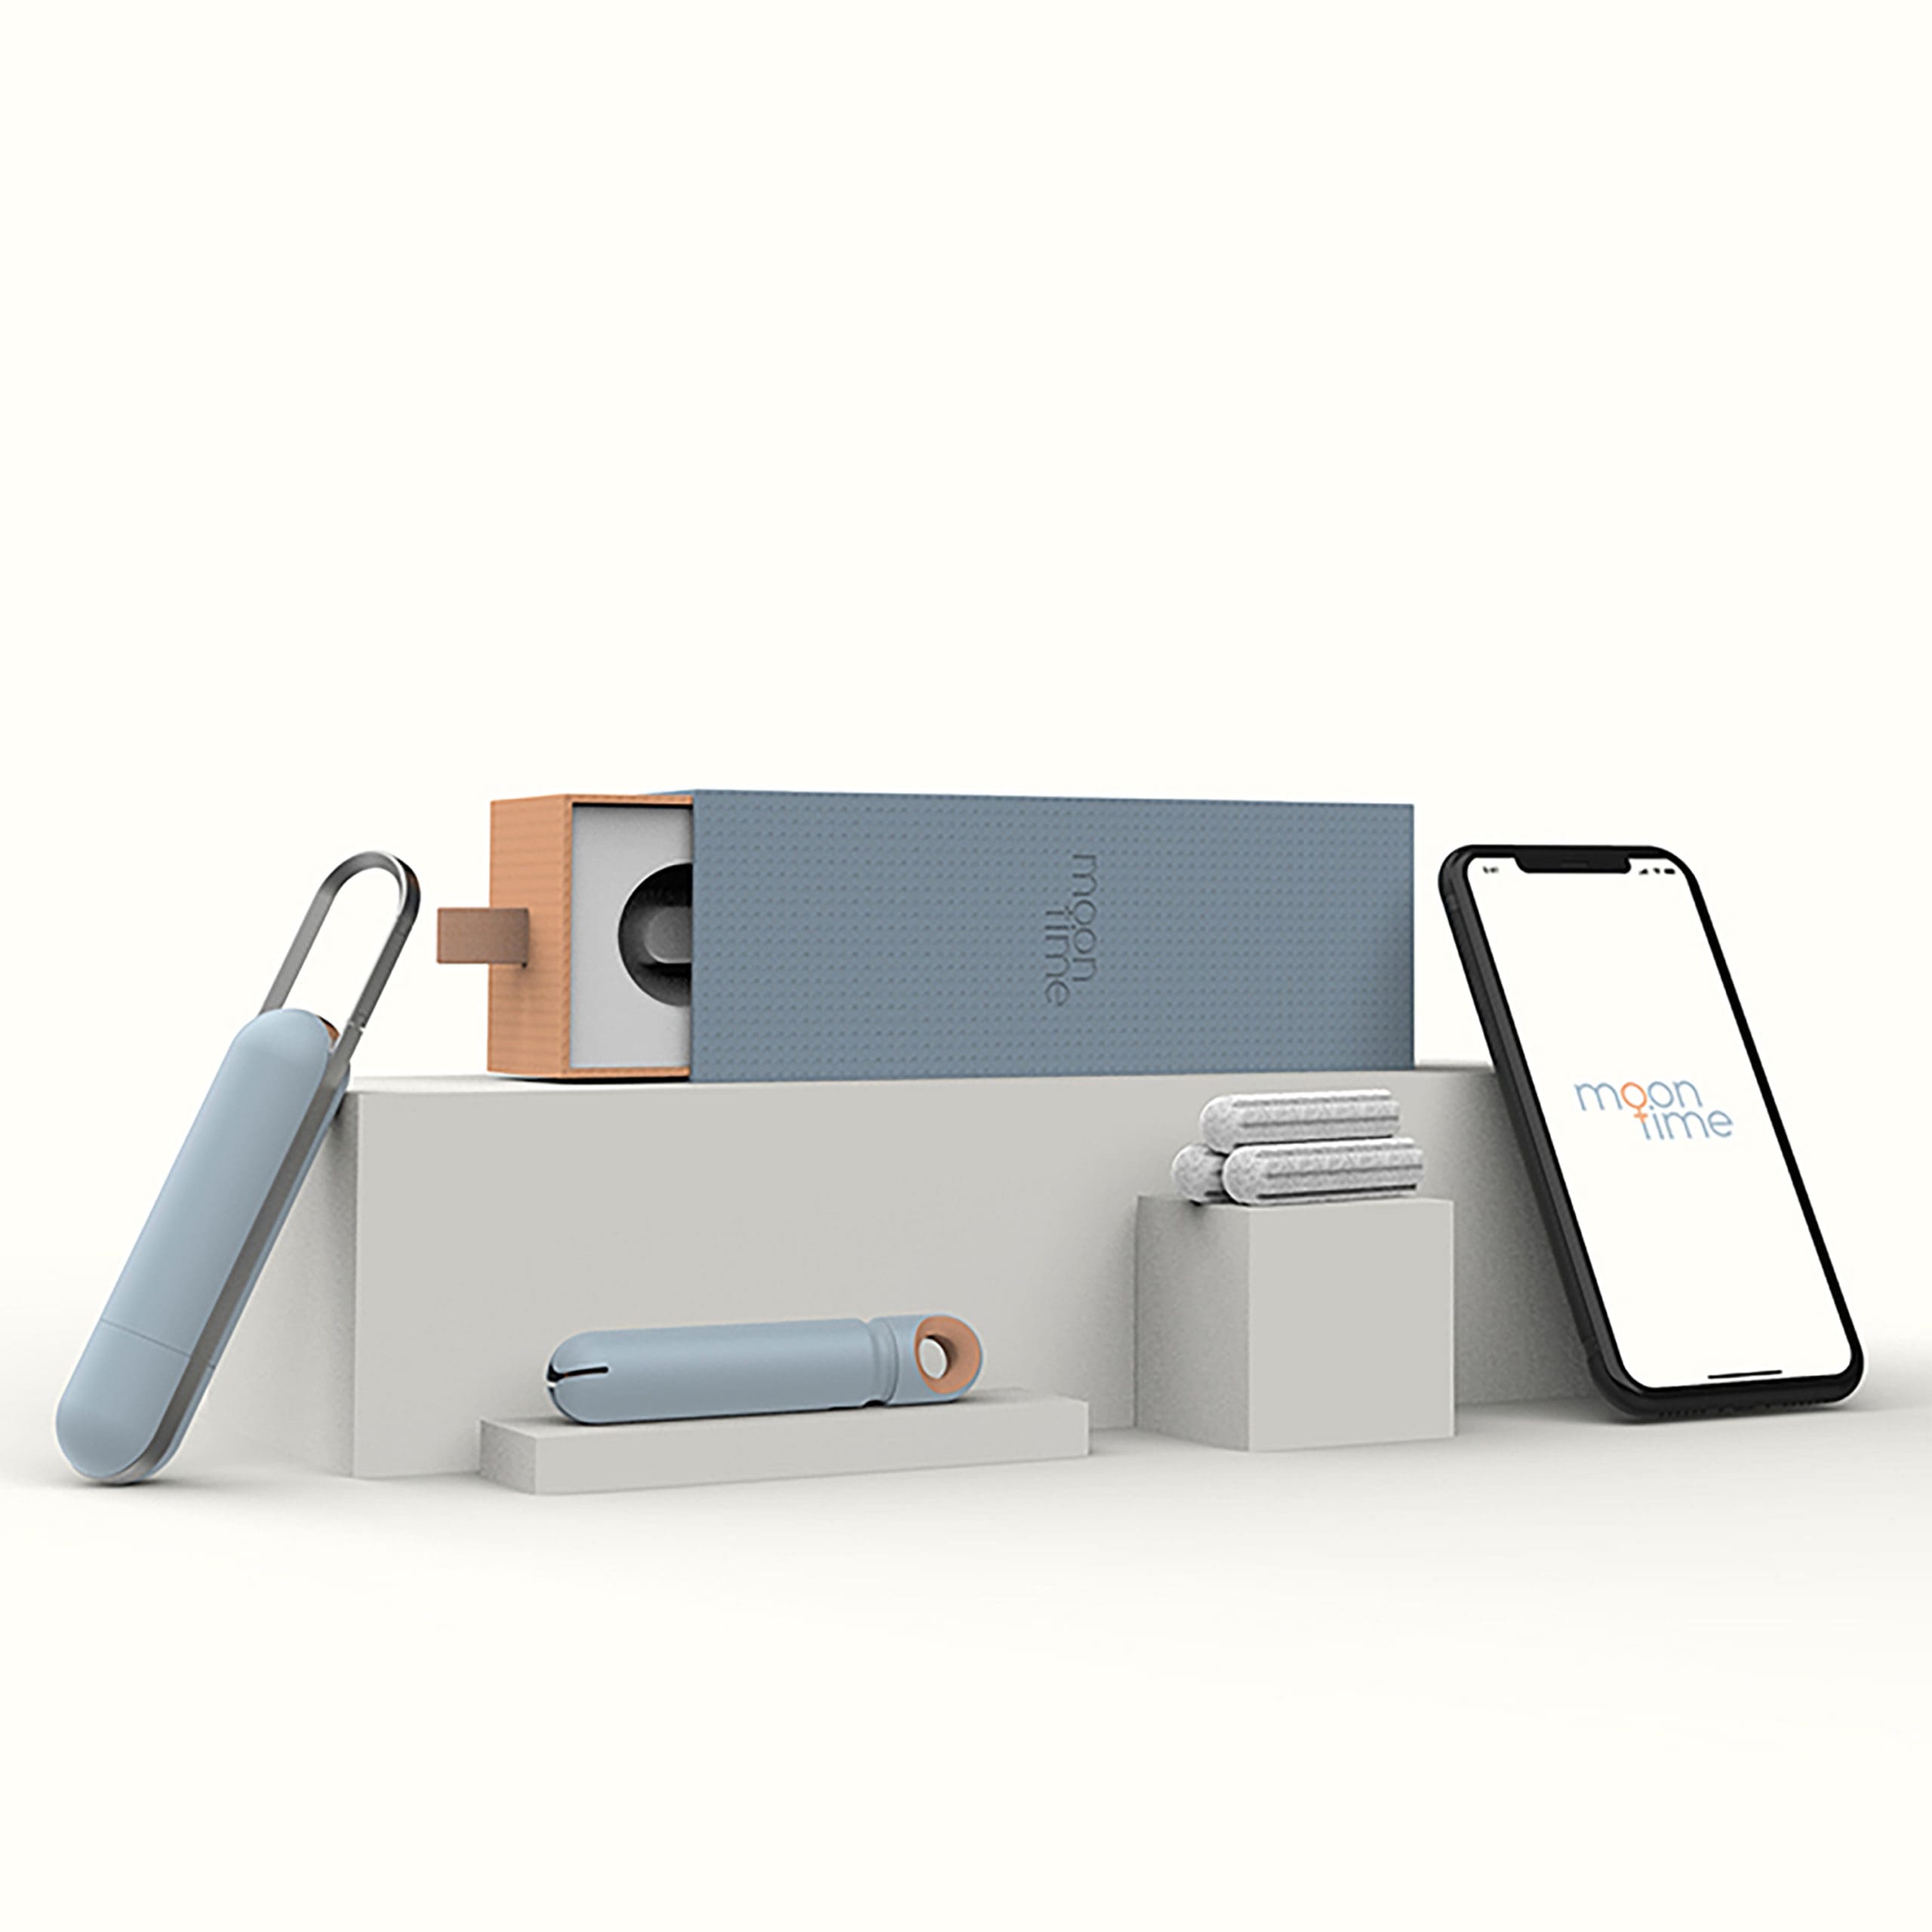 Photo of a smart phone, tampons in blue packaging, and other feminine hygiene products displayed on top of white blocks on a white backdrop. The phone and a long blue package says "Moon Time."